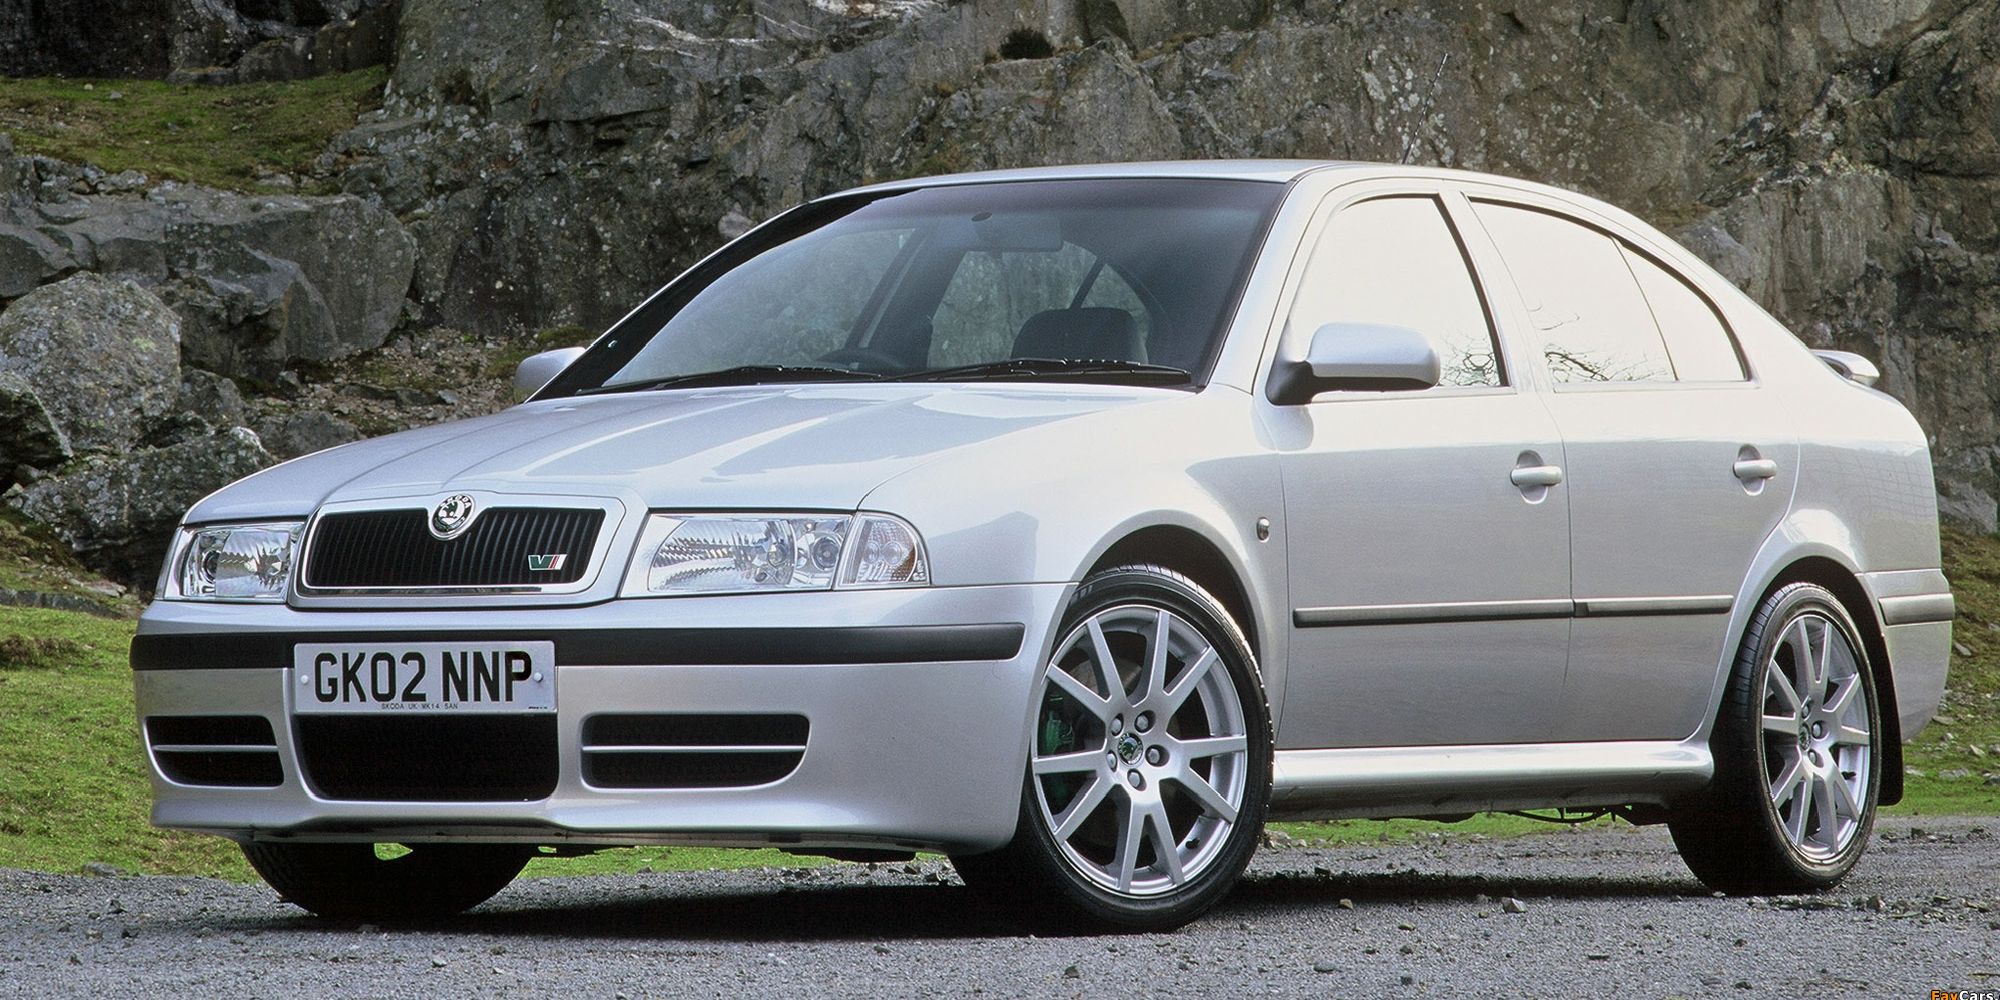 The front of the Mk1 Octavia RS in silver